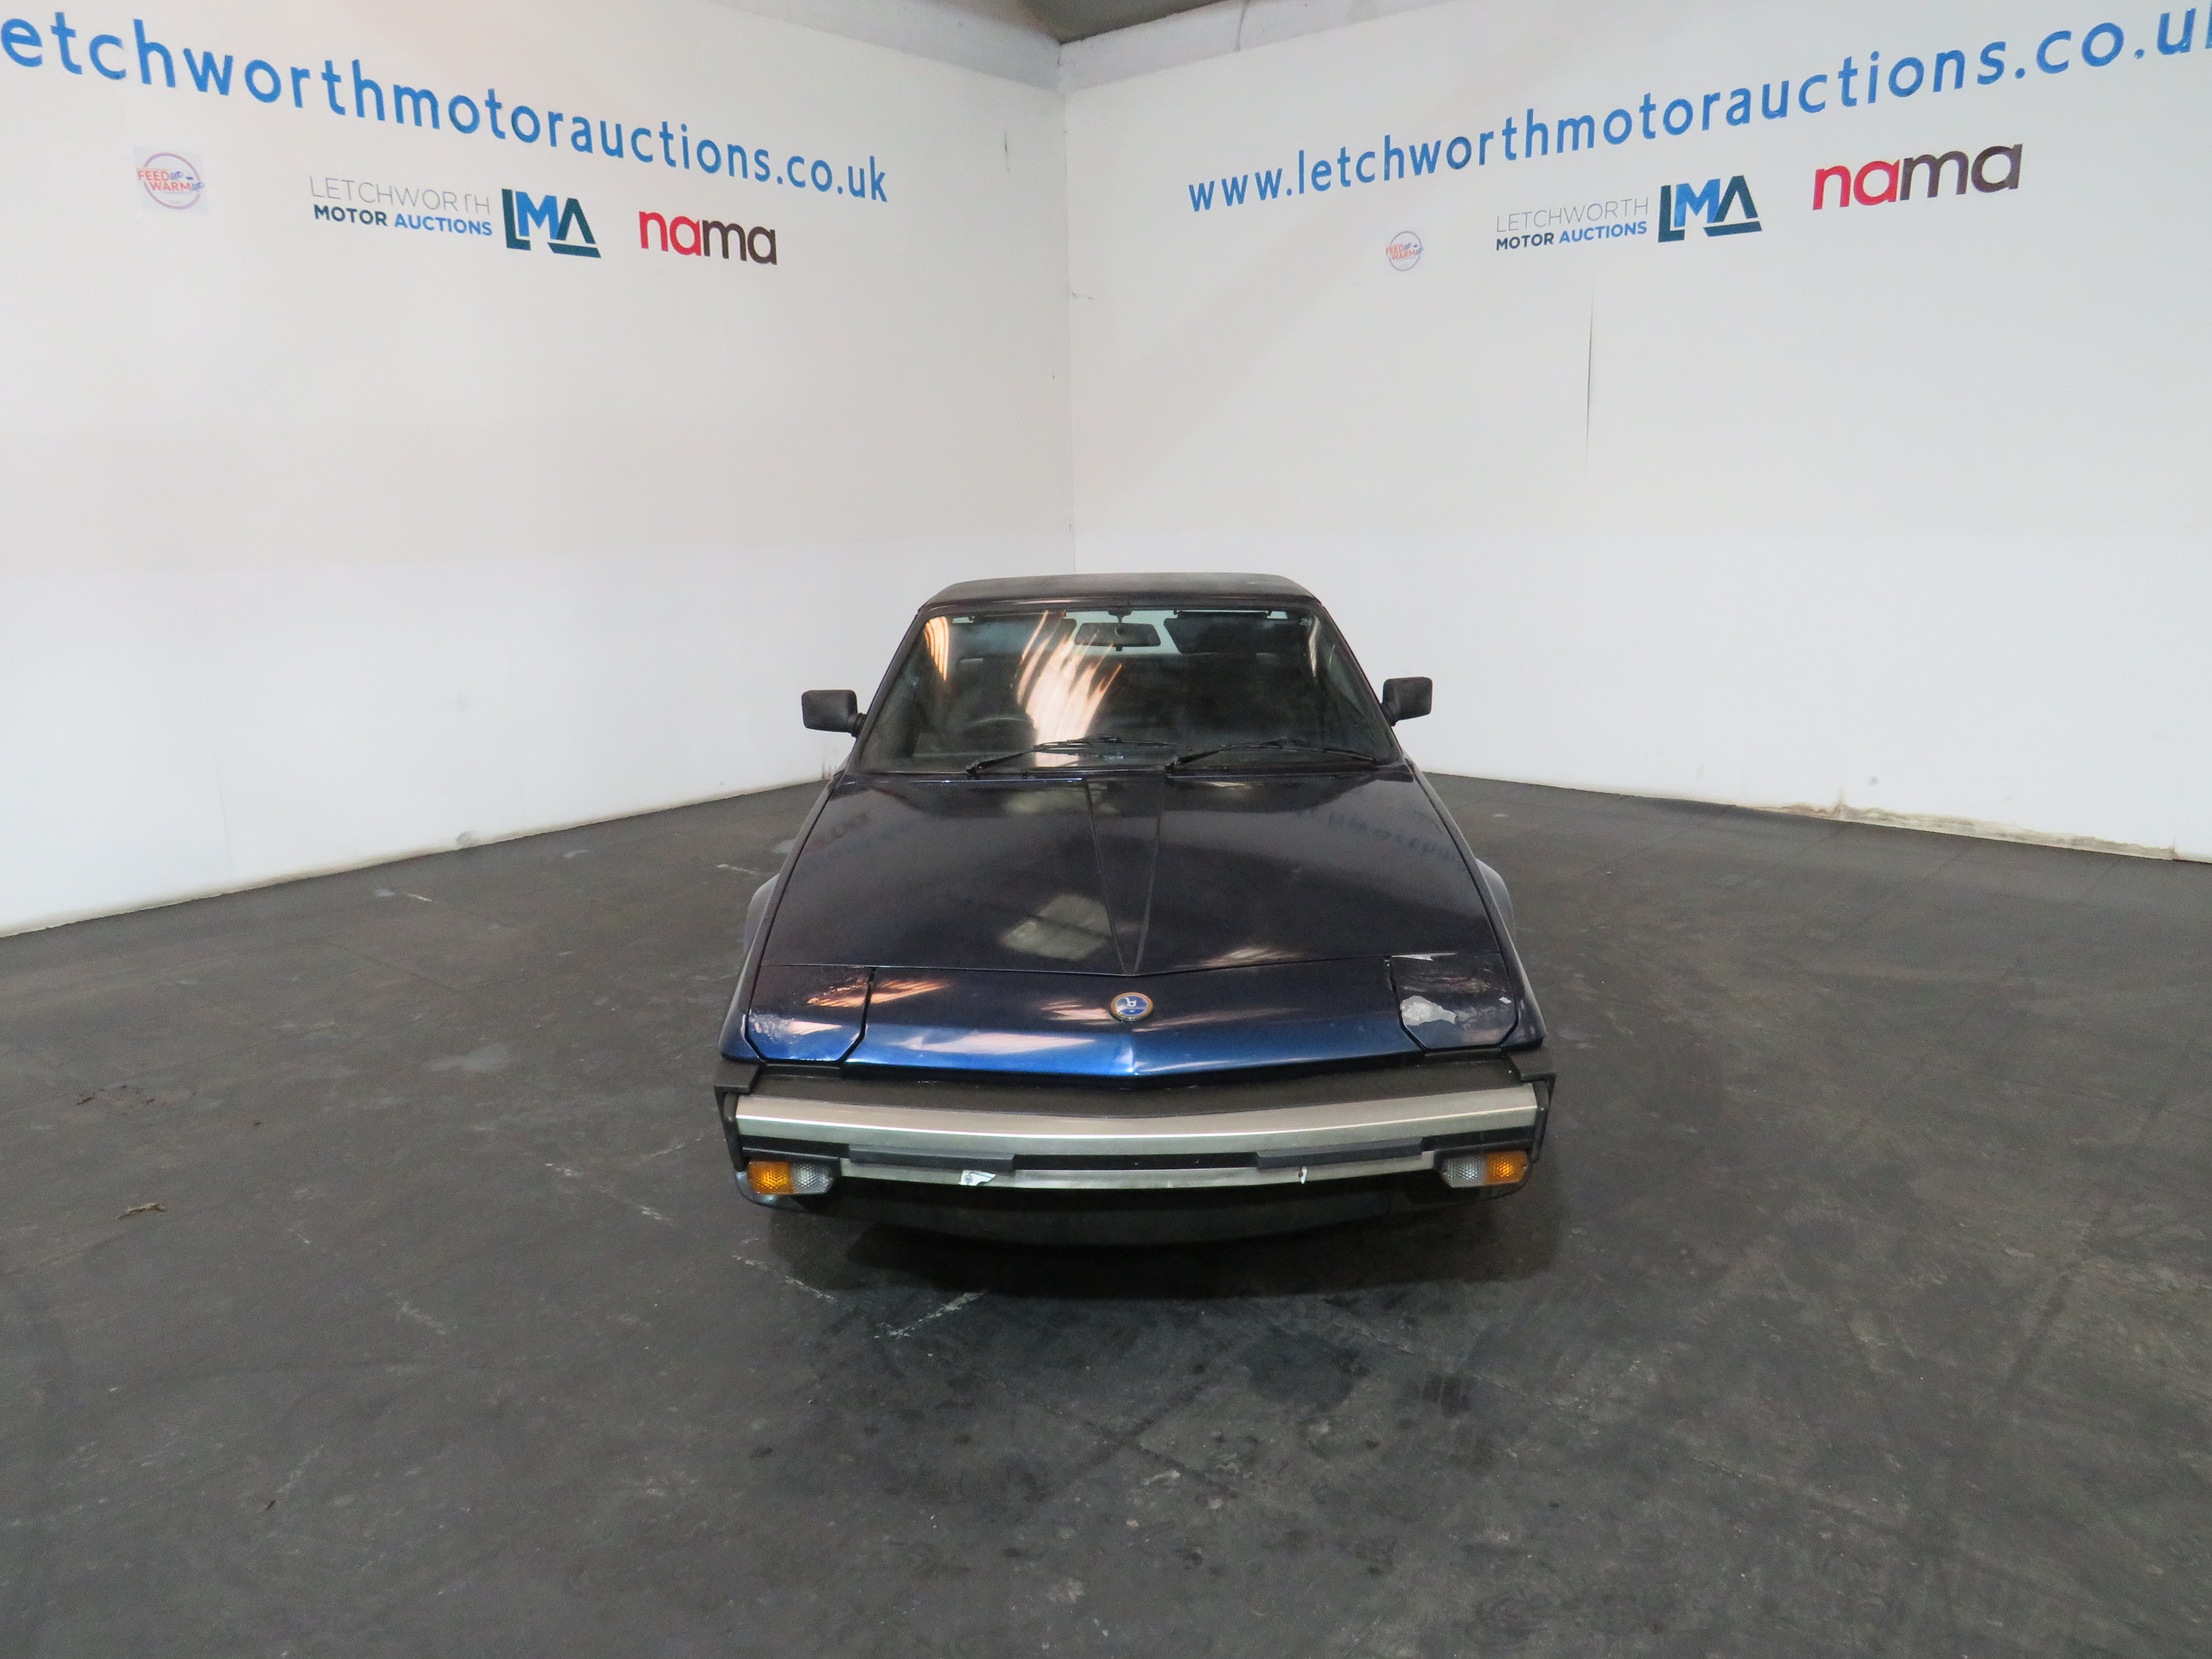 1989 Fiat X1/9 Gran Finale - 1498cc - ONE OWNER FROM NEW - Image 3 of 38